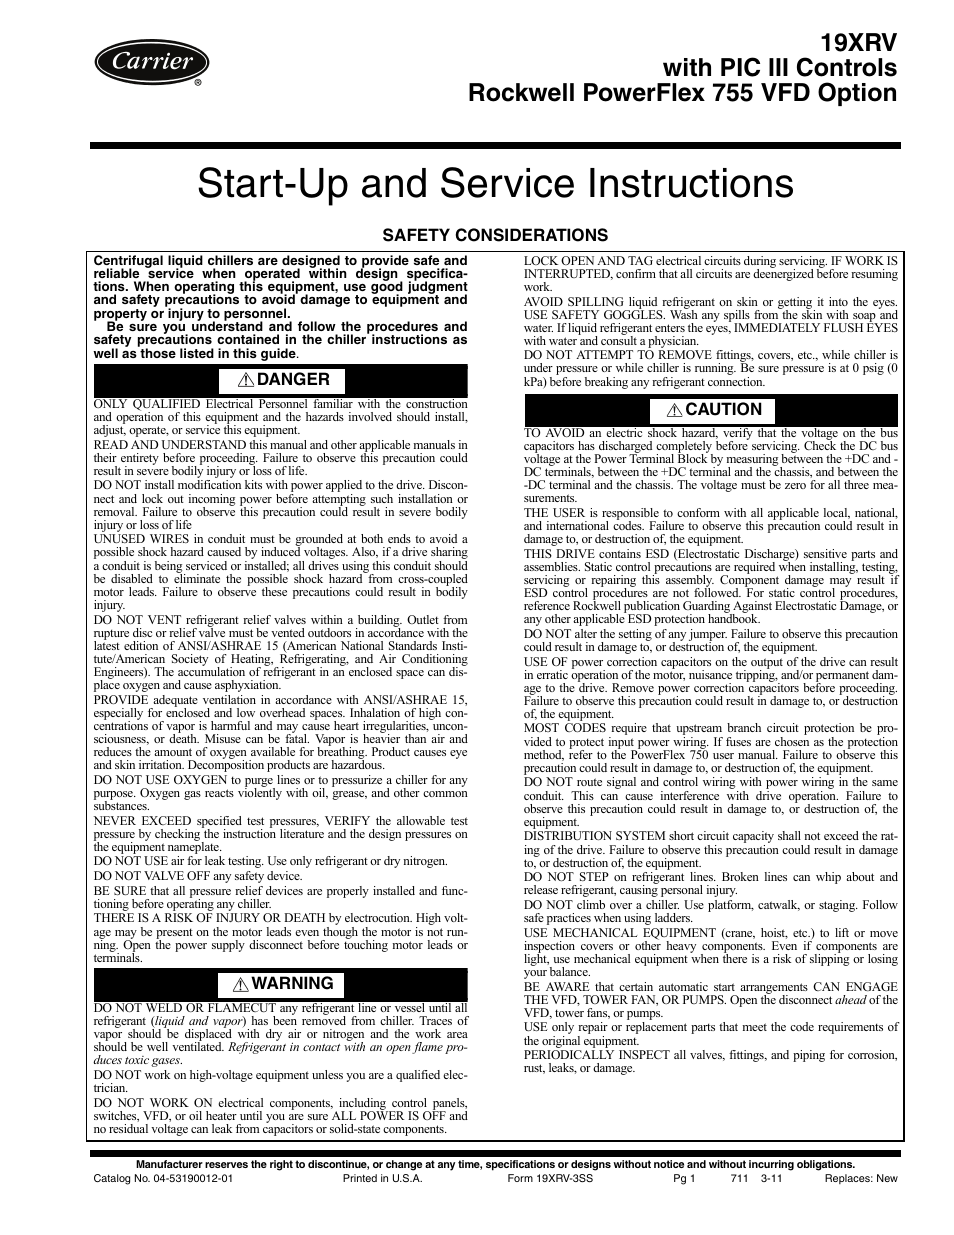 Carrier 19XRV User Manual | 40 pages | Original mode